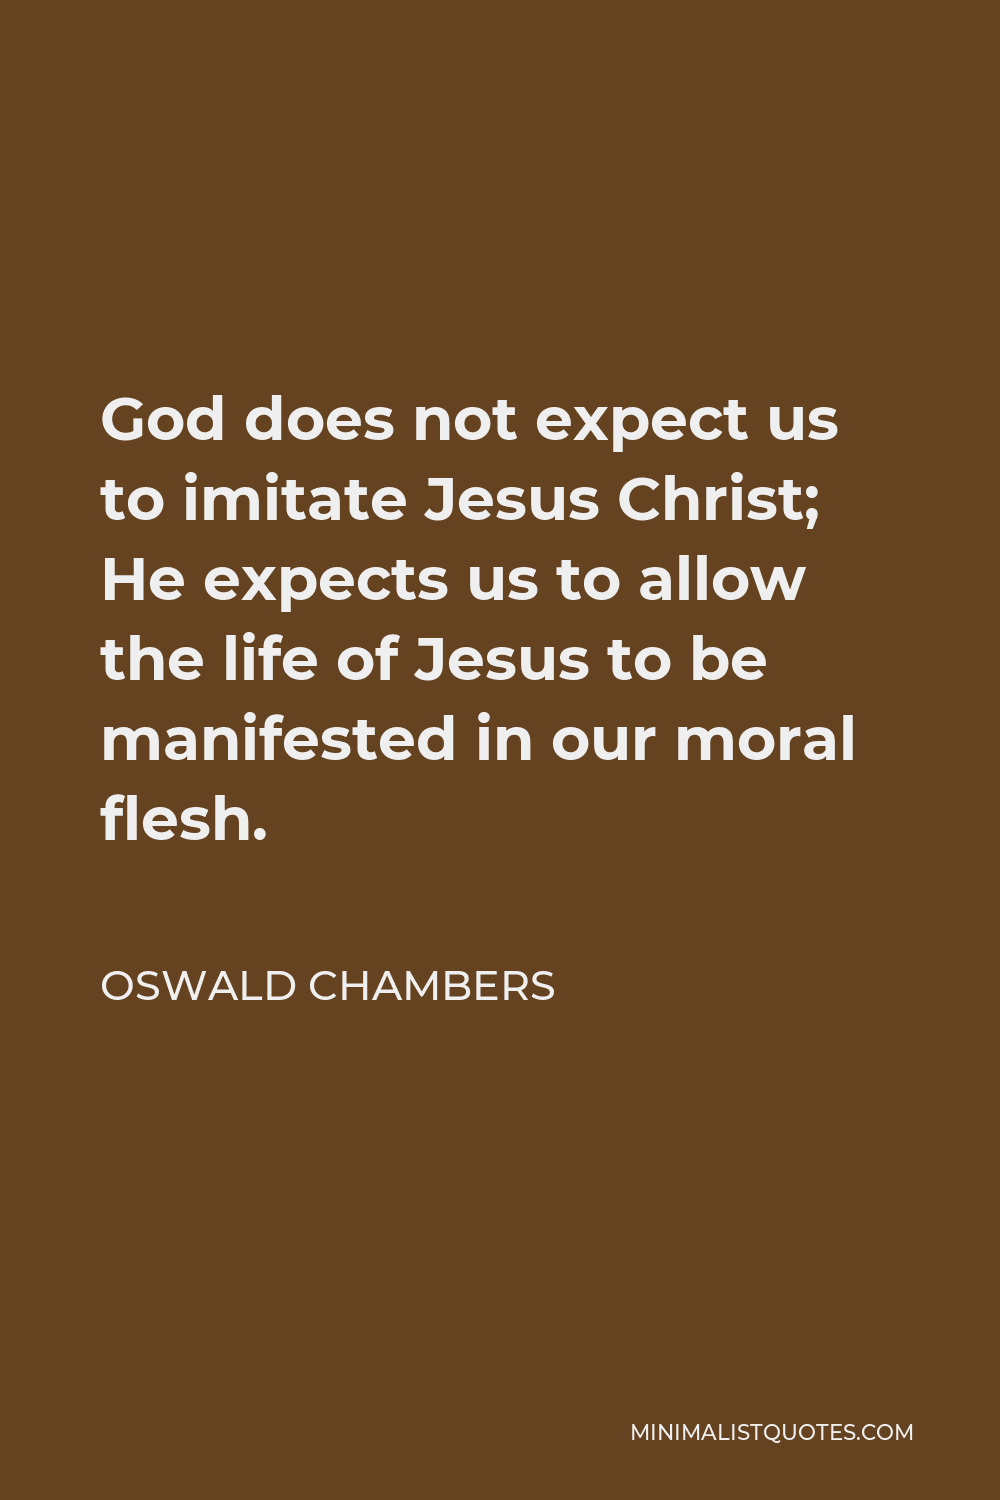 Oswald Chambers Quote - God does not expect us to imitate Jesus Christ; He expects us to allow the life of Jesus to be manifested in our moral flesh.